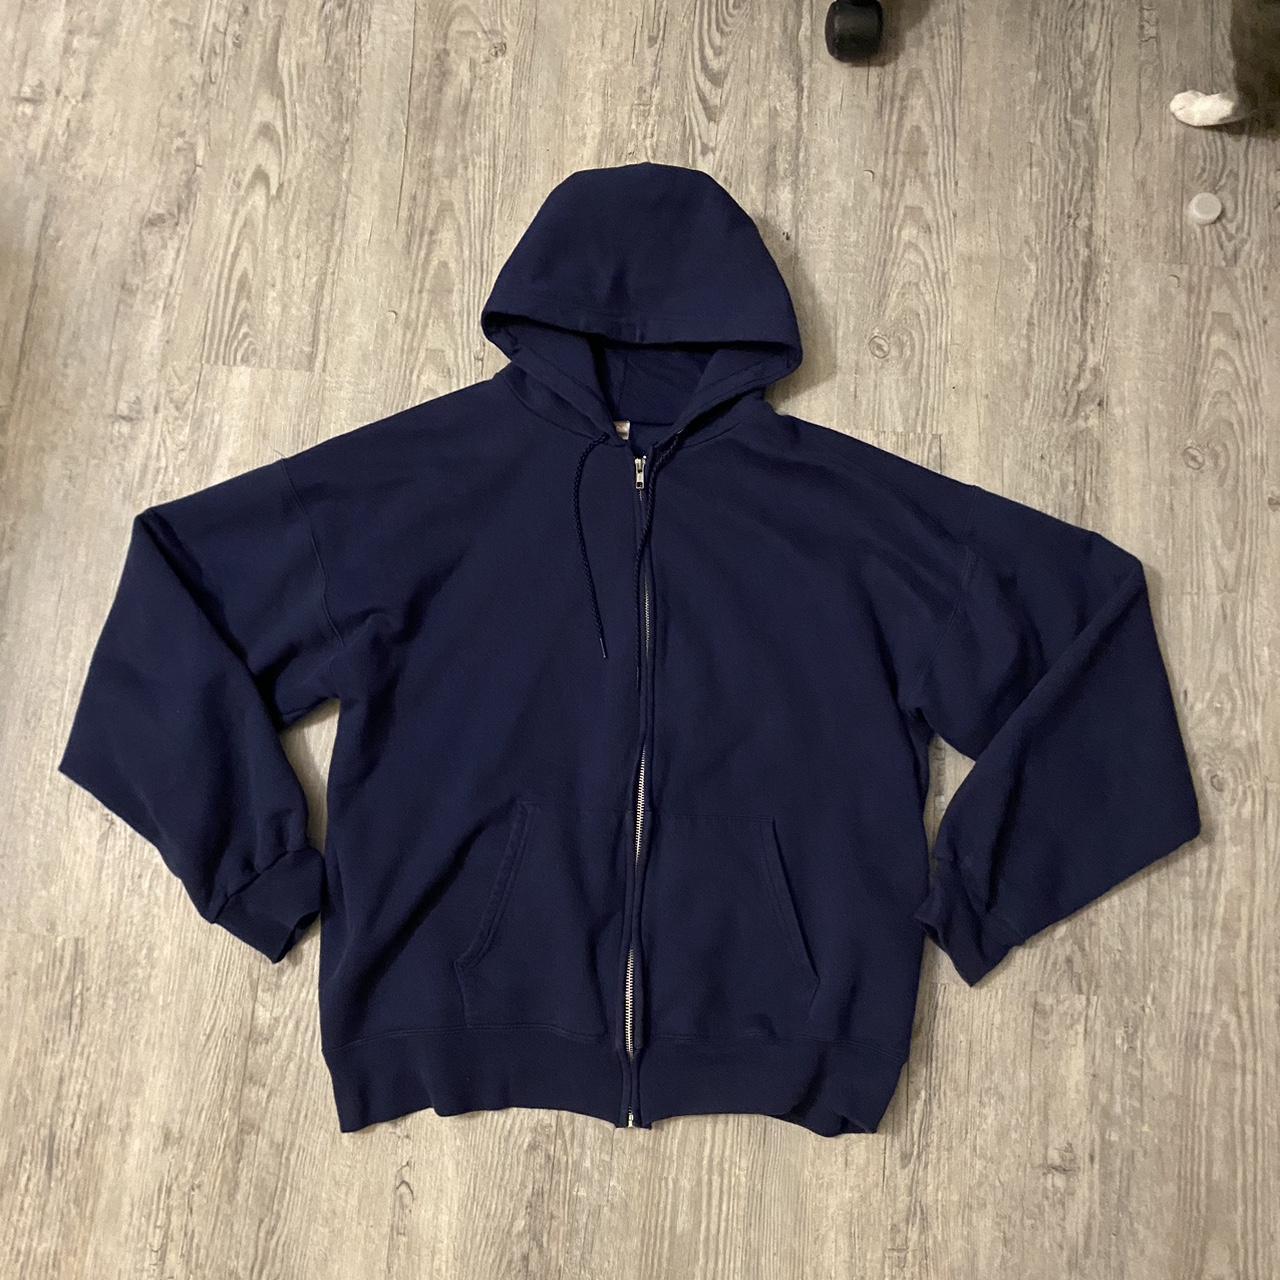 amazing blue hanes zip up dm me if you have any... - Depop